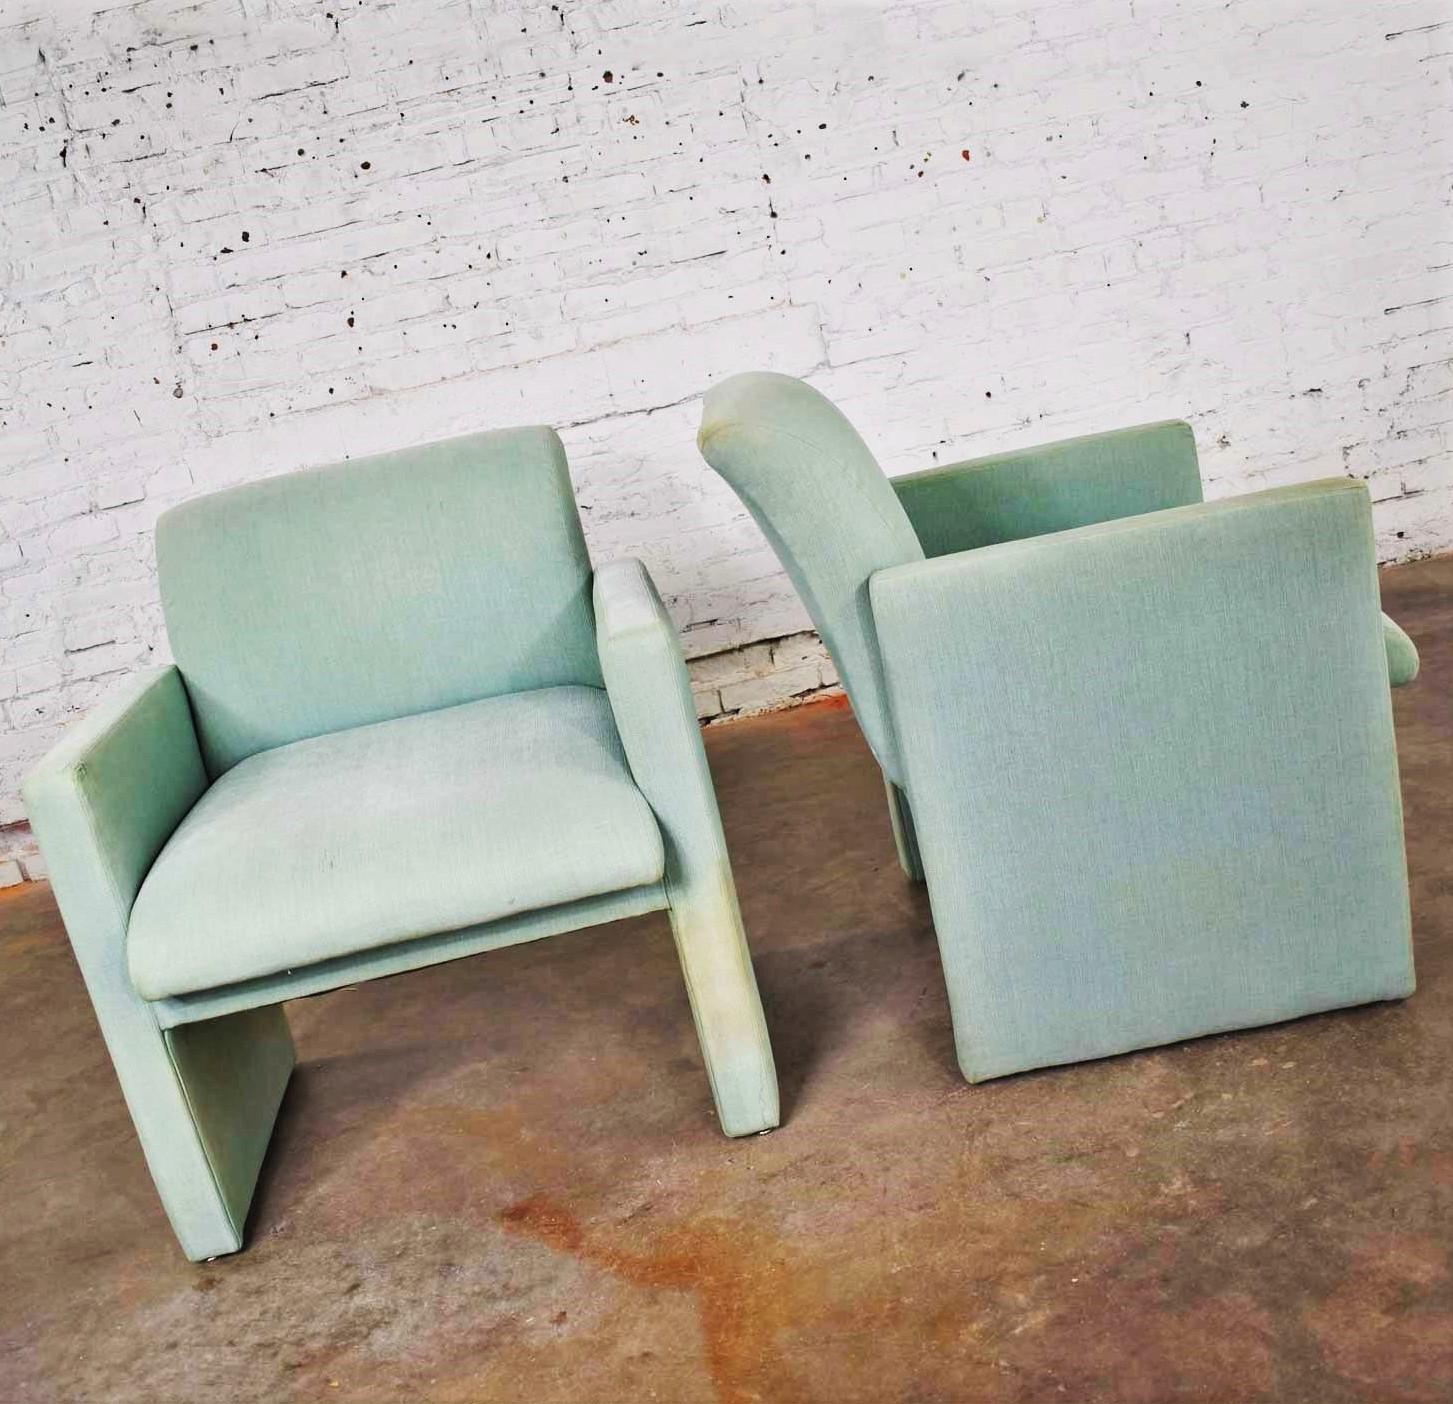 Handsome petite pair of modern accent chairs. They are currently in a sea green upholstery, but it is showing lots of wear, fading, and stains. We are sure you will want to recover. However, we still gave them a good shampoo. Otherwise they are in